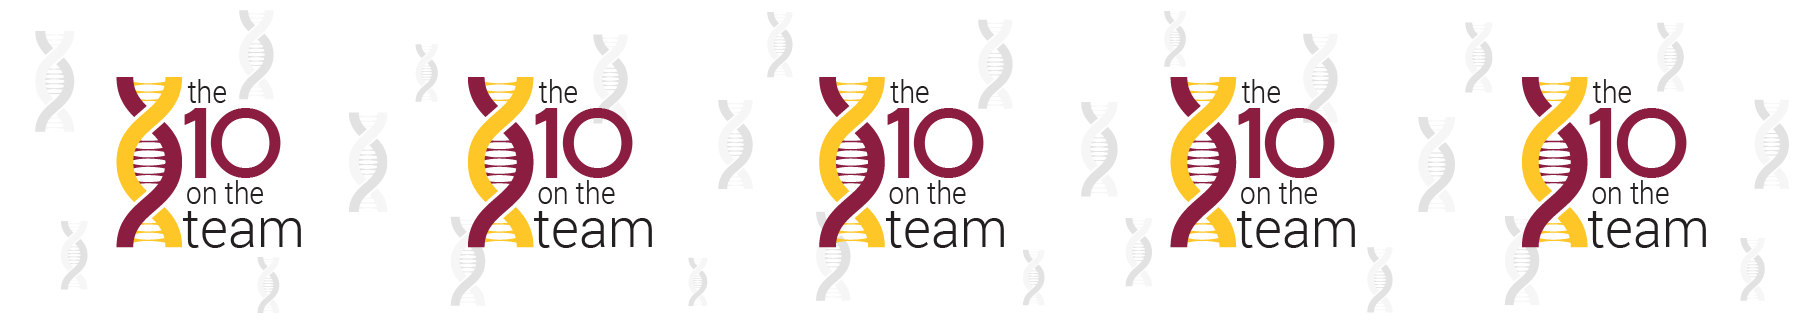 the_10_on_the_team